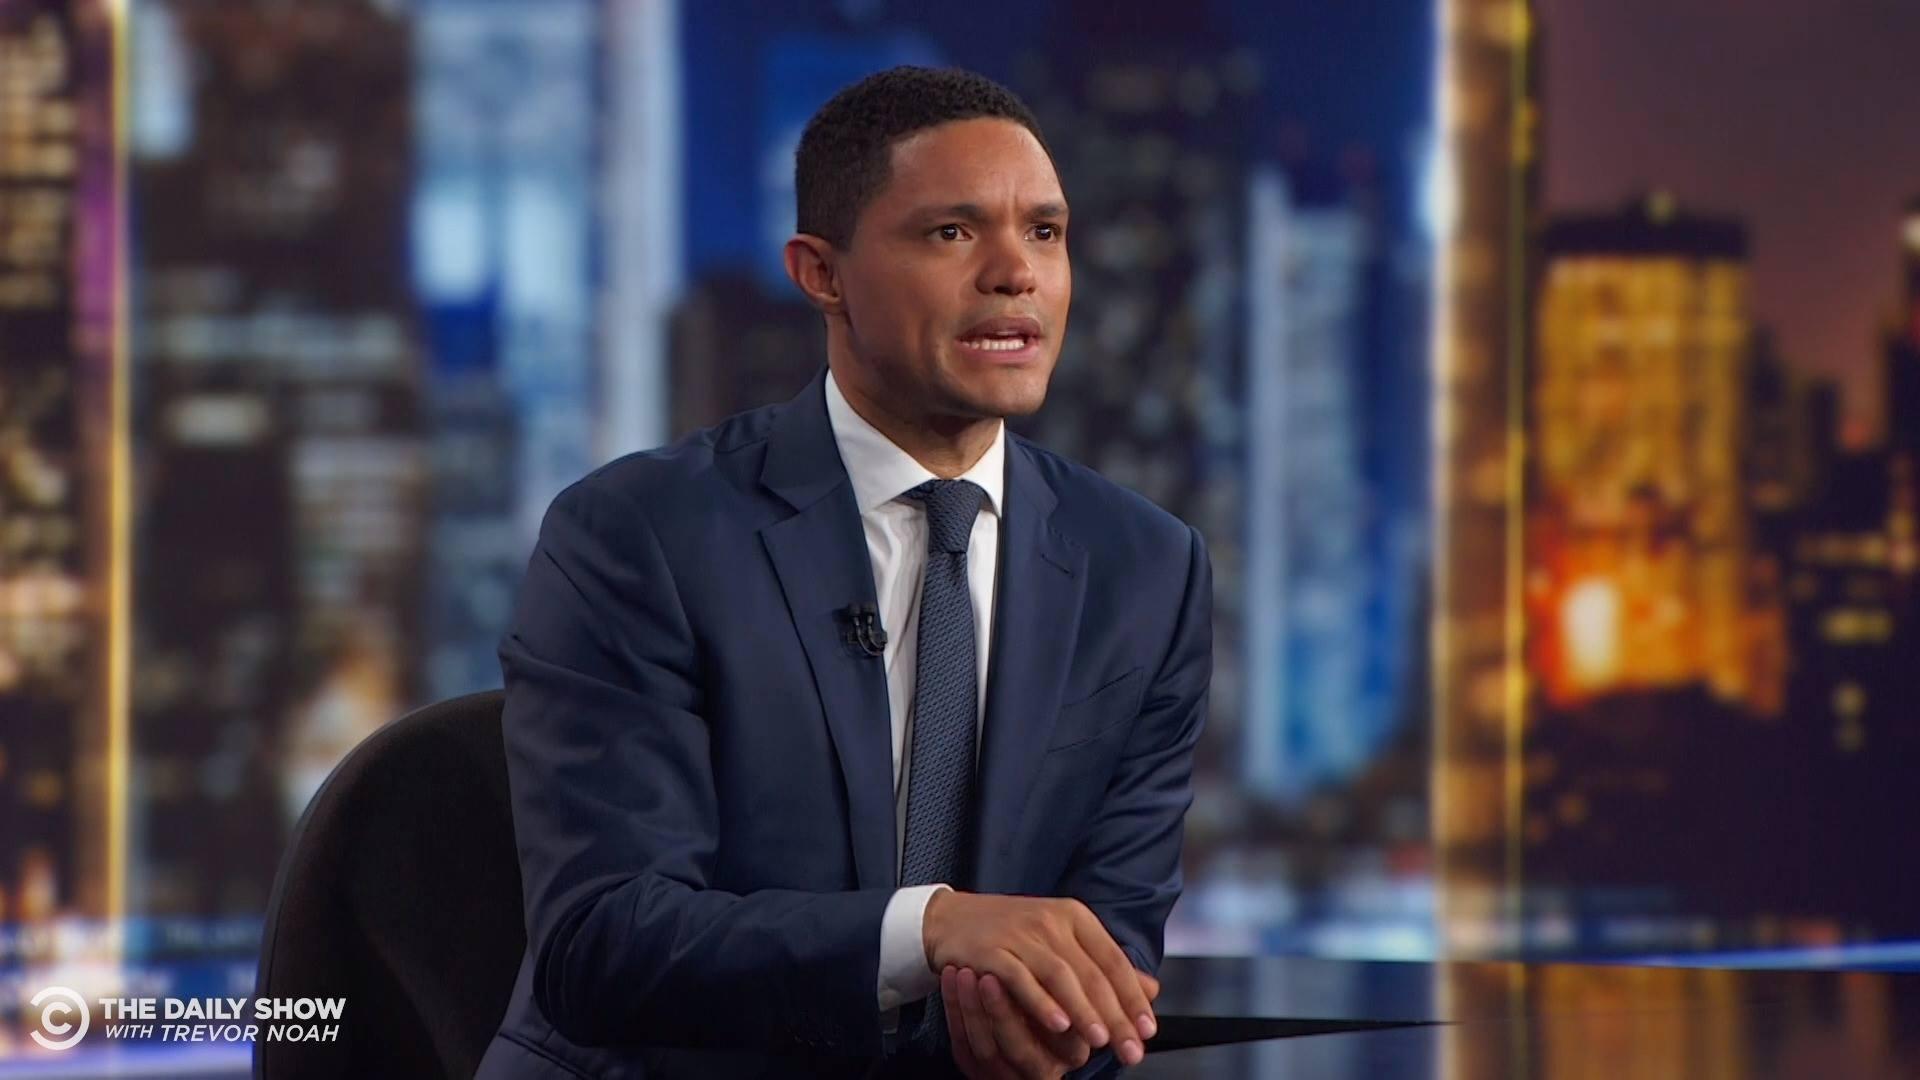 WATCH What Happened to Trevor Noah's Best Friend Teddy from His Book